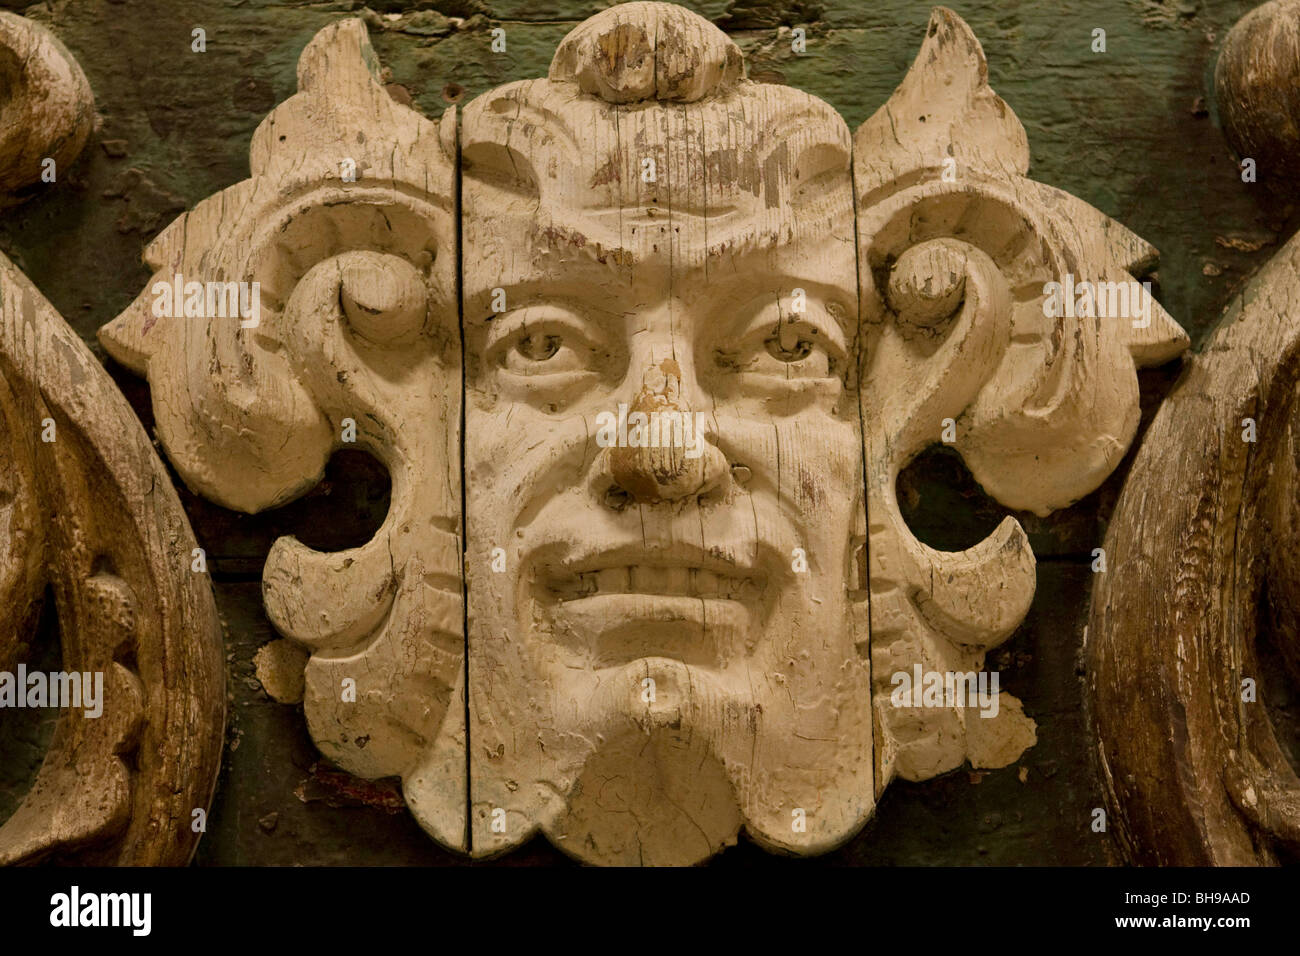 Old carved wooden face, Circus World Museum, Baraboo, Wisconsin, USA, North America. Stock Photo